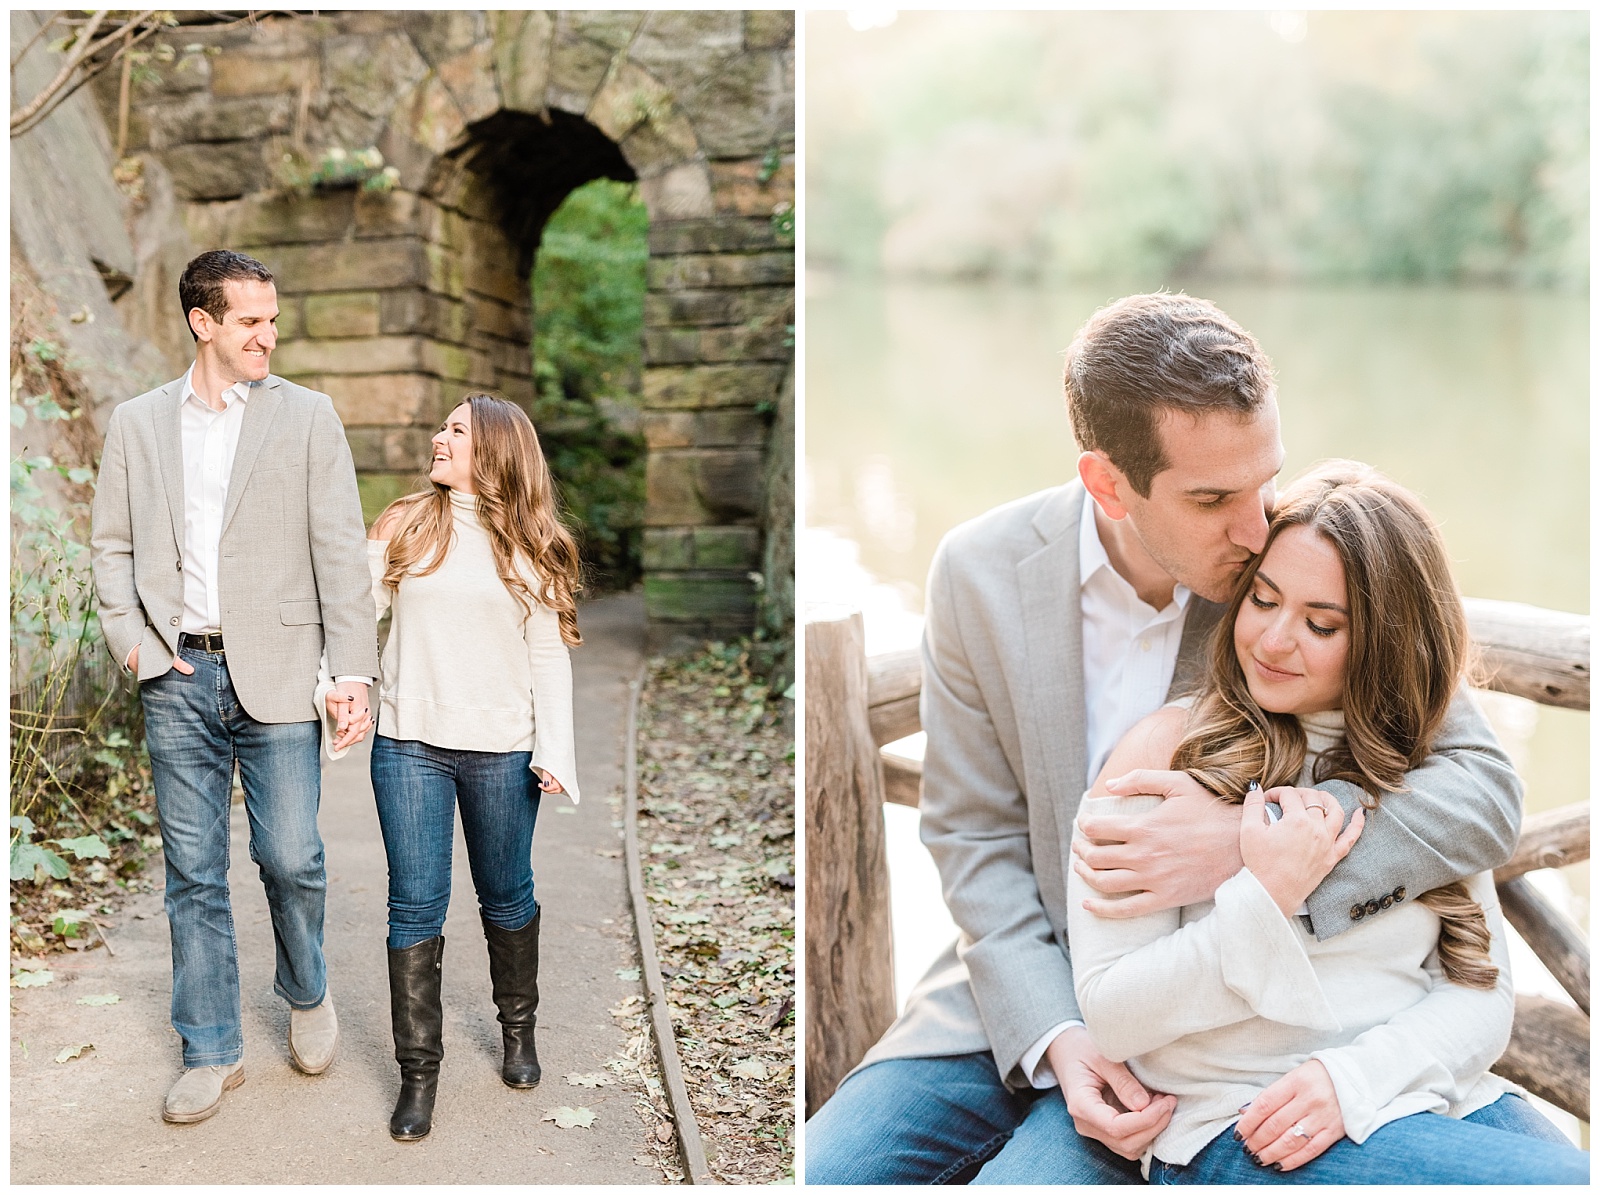 Central Park,City,Engagement Session,Fall,NYC,Nature,New York,Wedding Photographer,